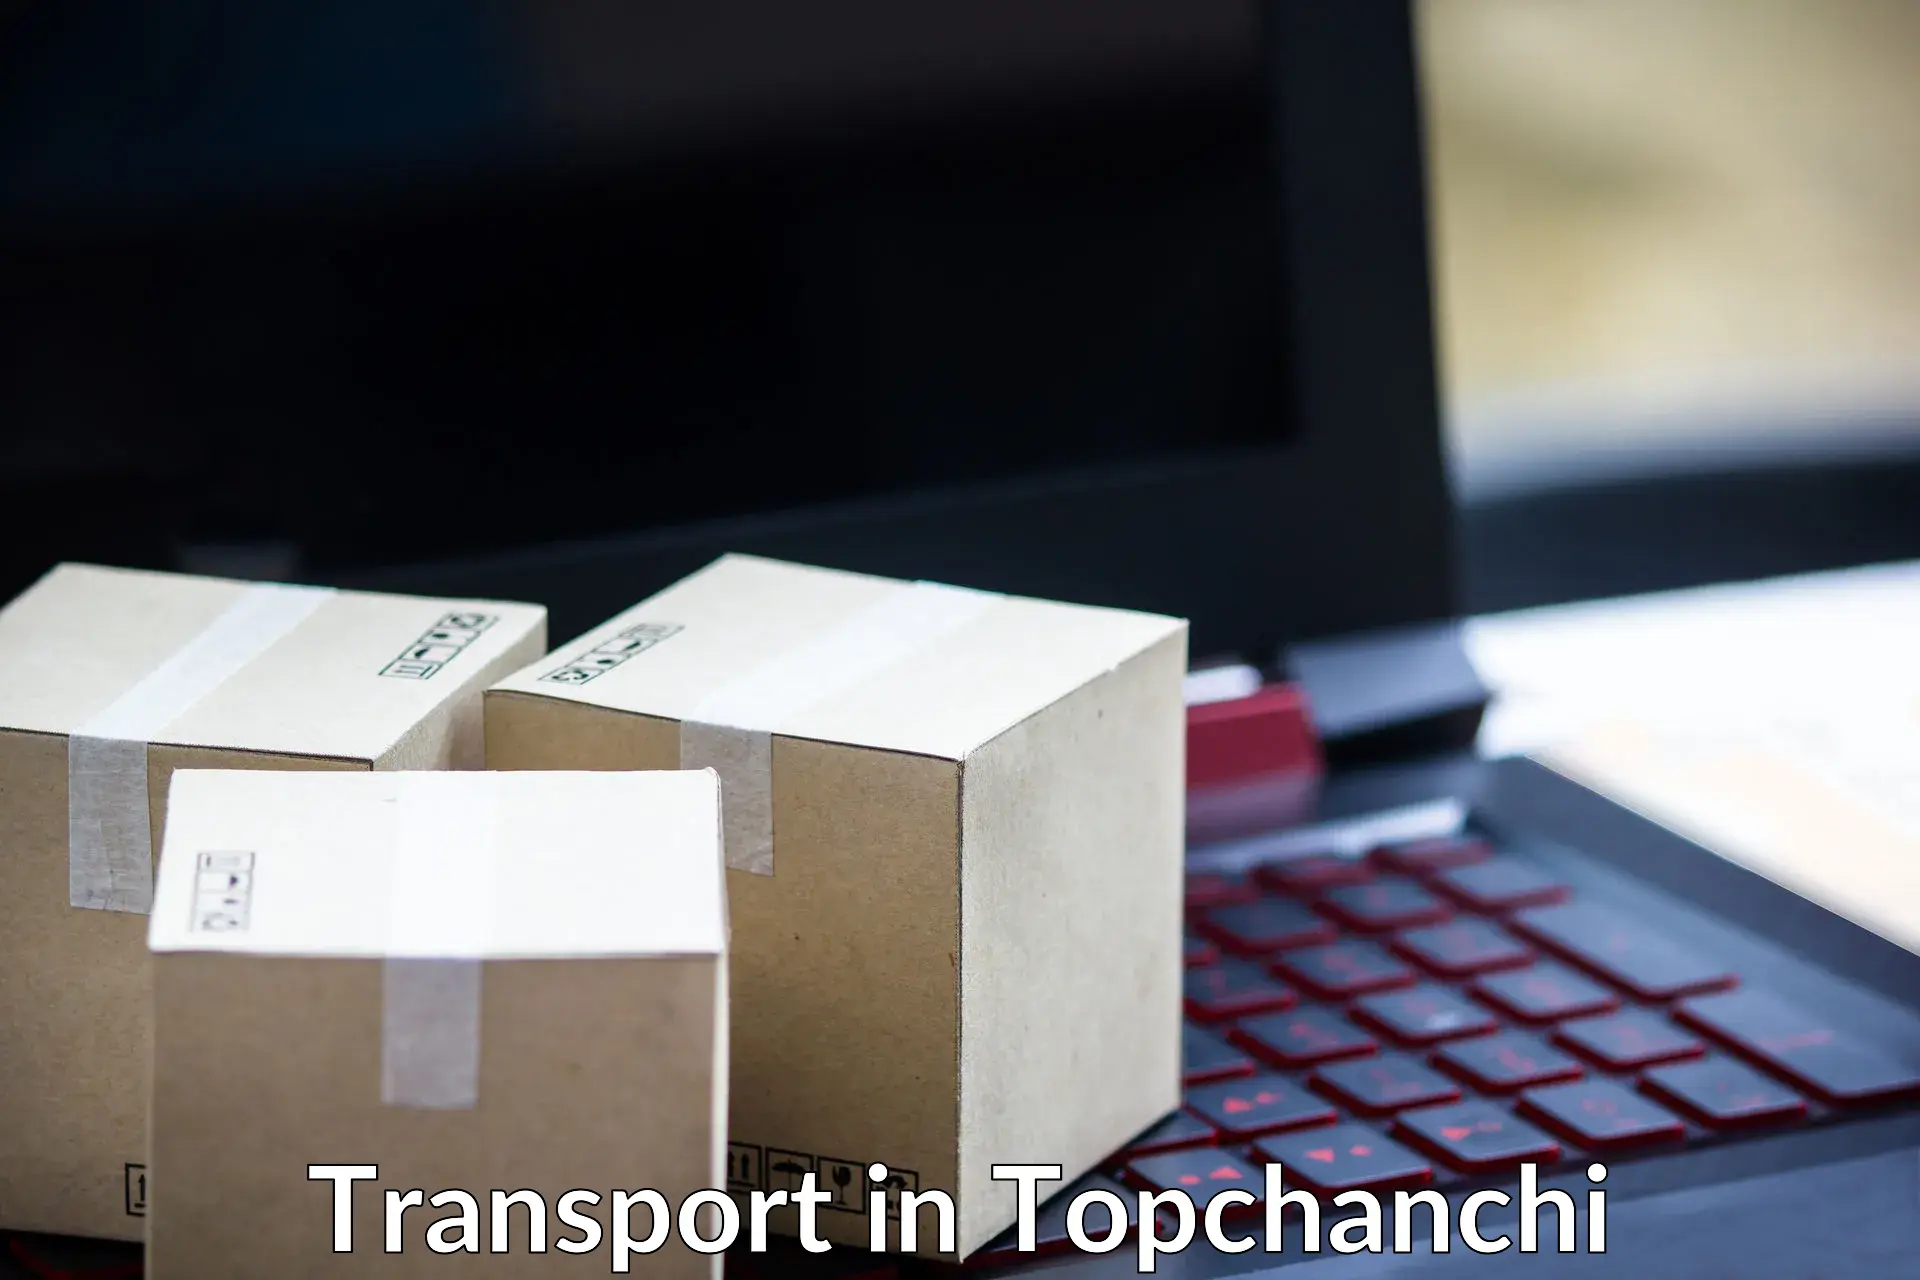 Express transport services in Topchanchi